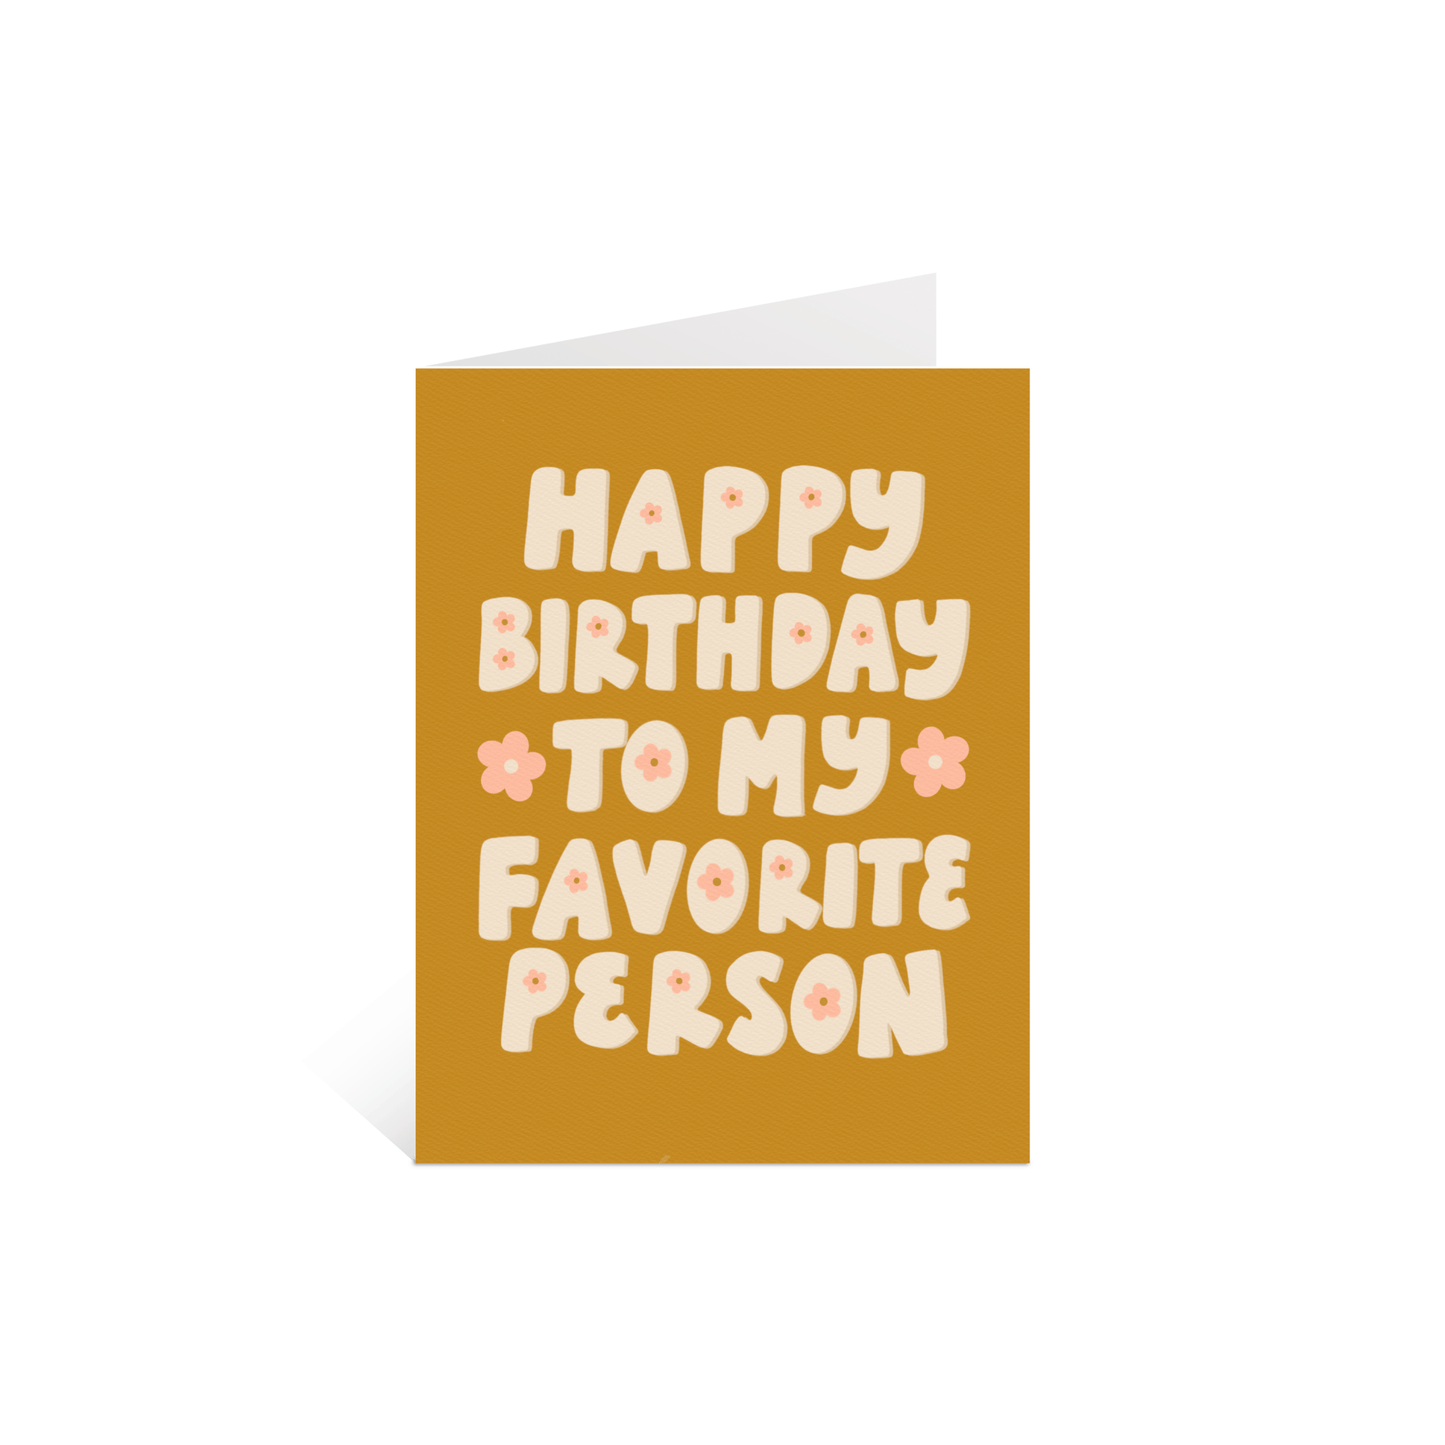 Happy Birthday To My Favorite Person Greeting Card - Calladine Creative Co